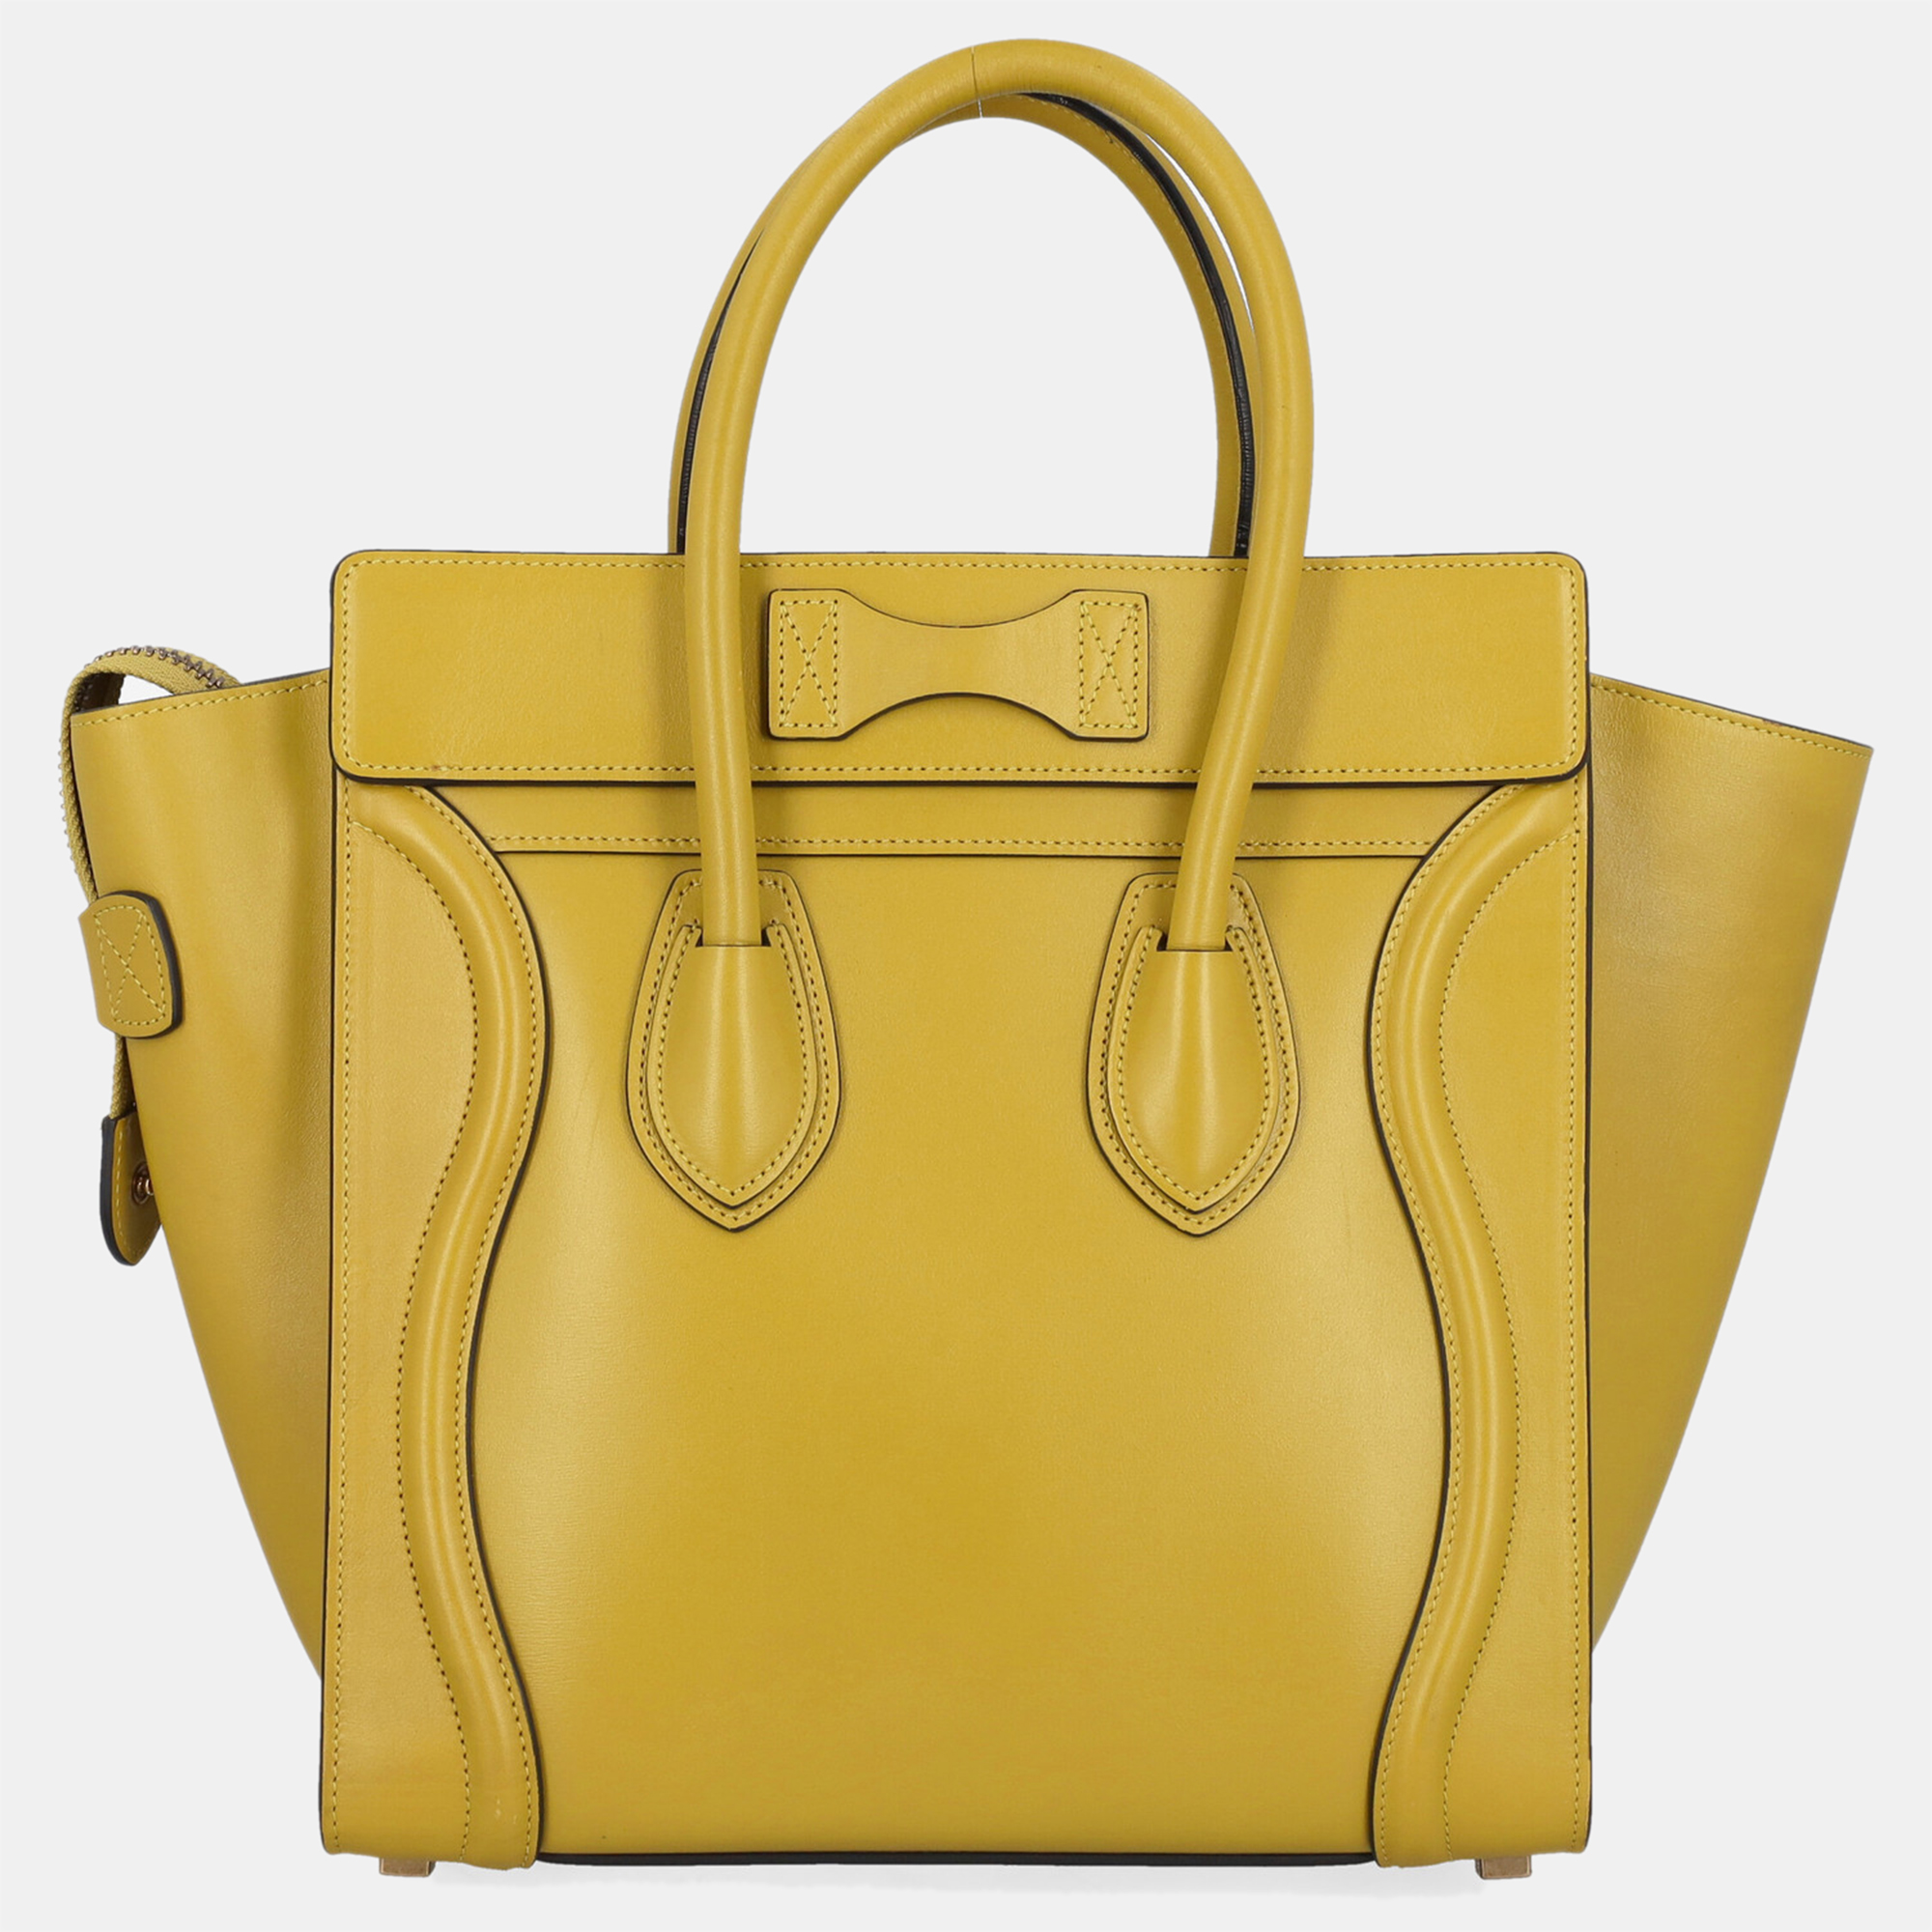 Celine Luggage -  Women's Leather Tote Bag - Yellow - One Size